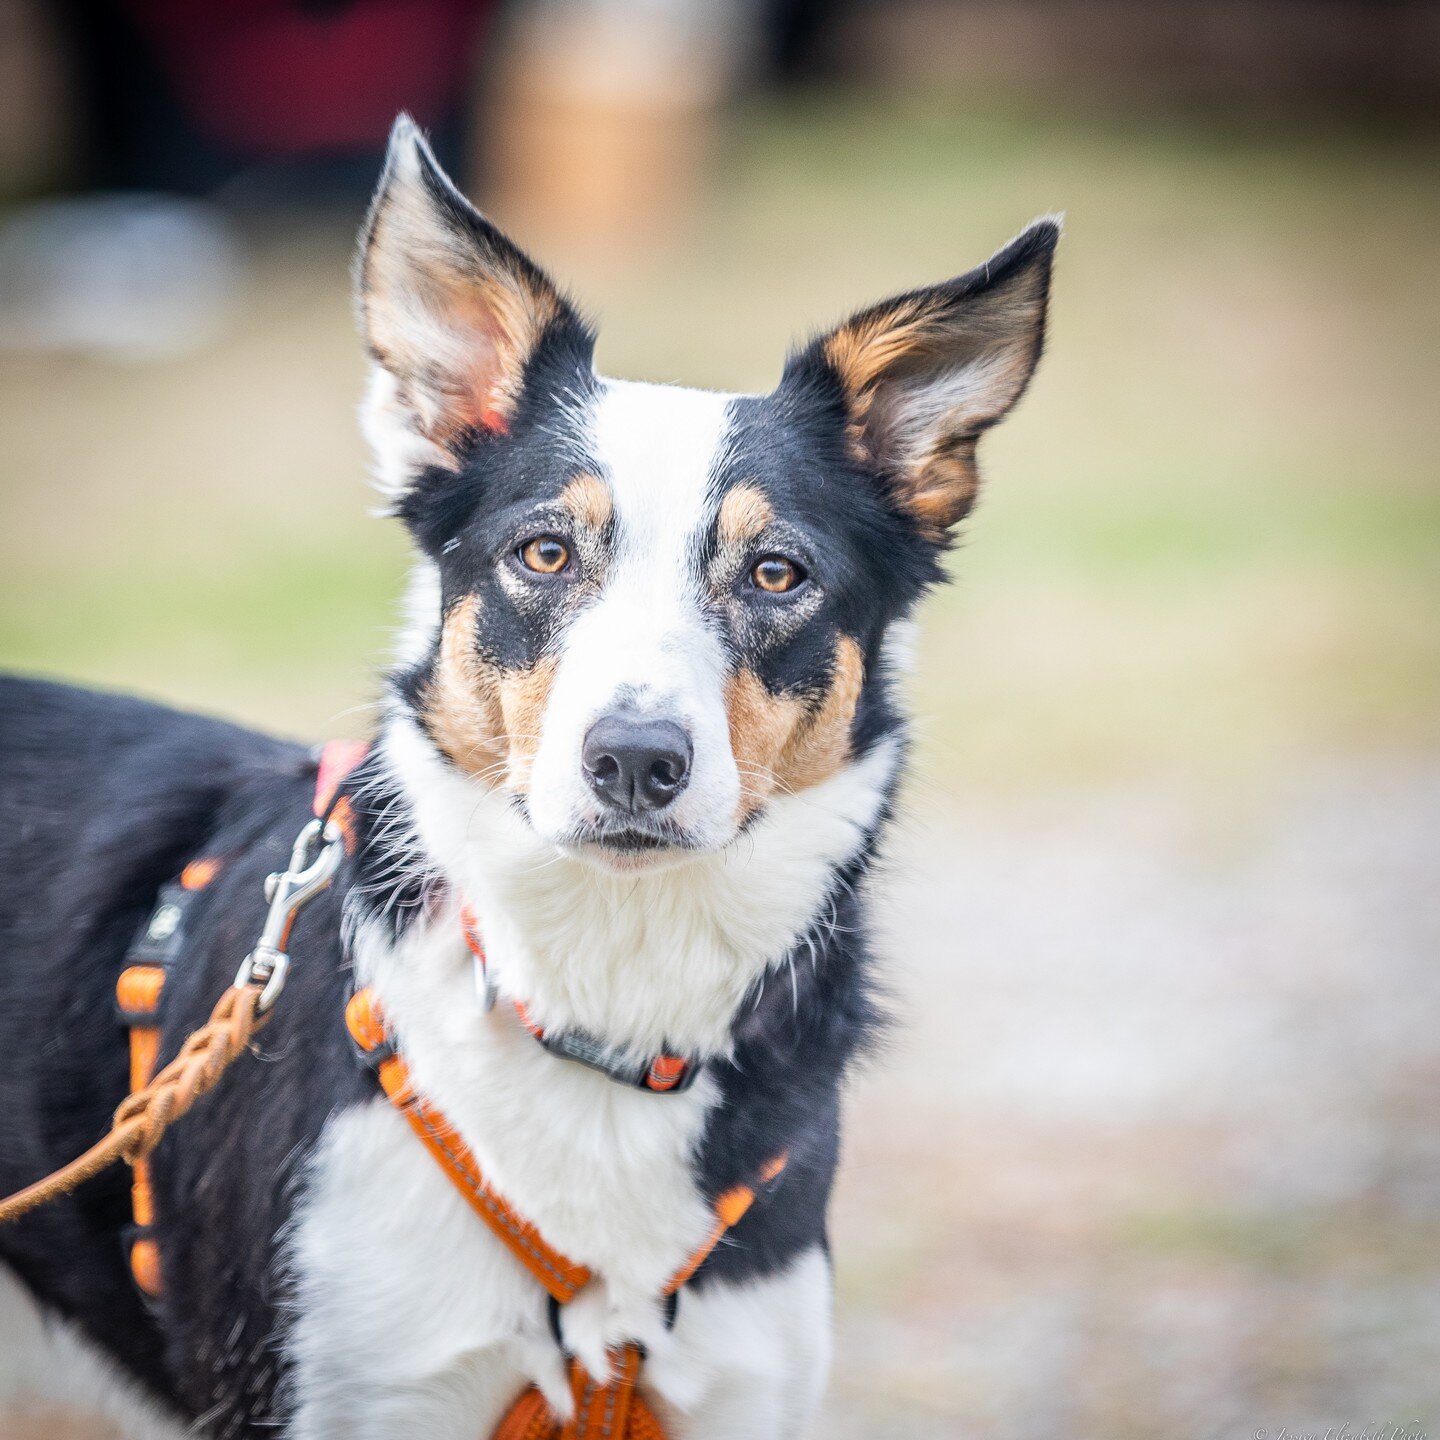 Let the games begin! 
Had the opportunity to photograph our canine friends at the NASDA dog trials compete in hunting and scent courses.

#nasda #dogphotography #scentworkdogs #dogsofinstagram